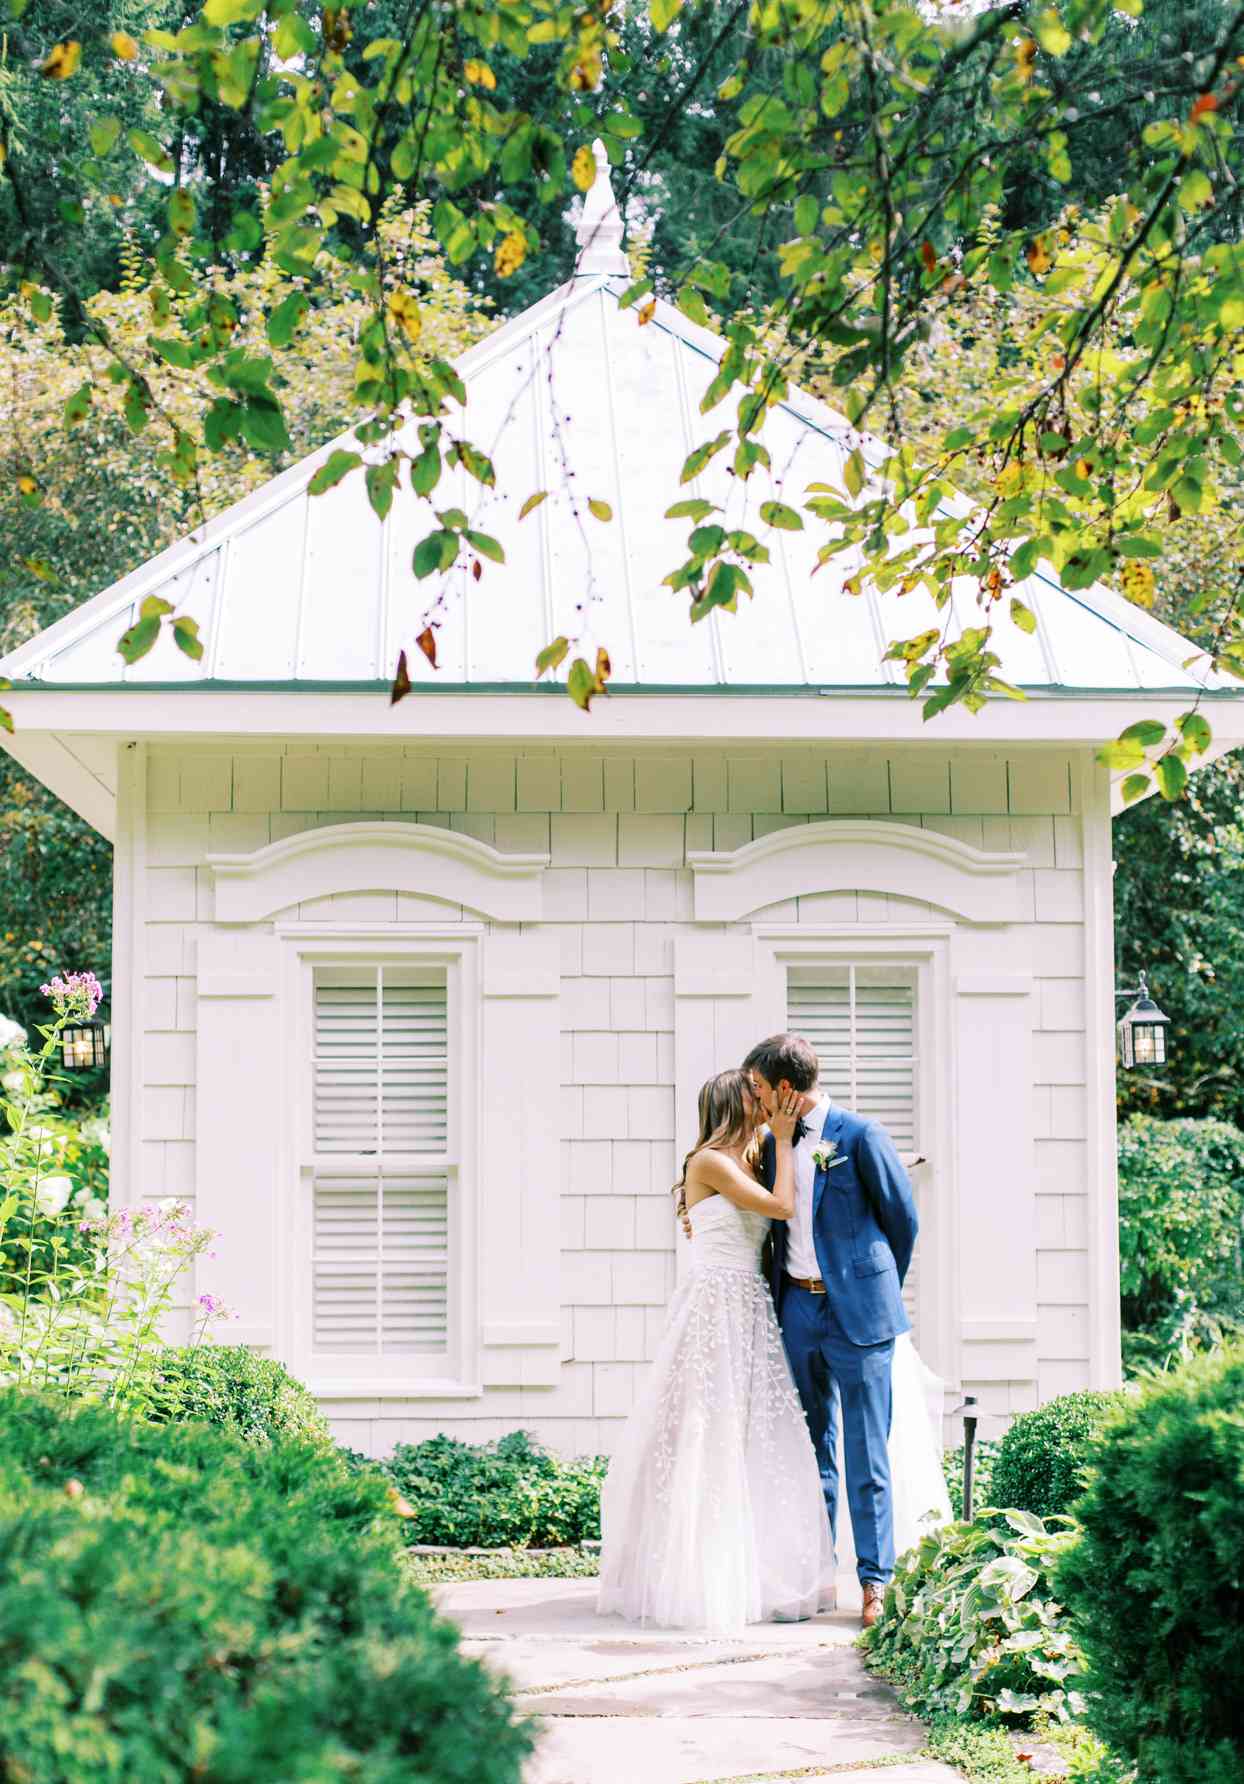 wedding couple kissing on stone path in garden